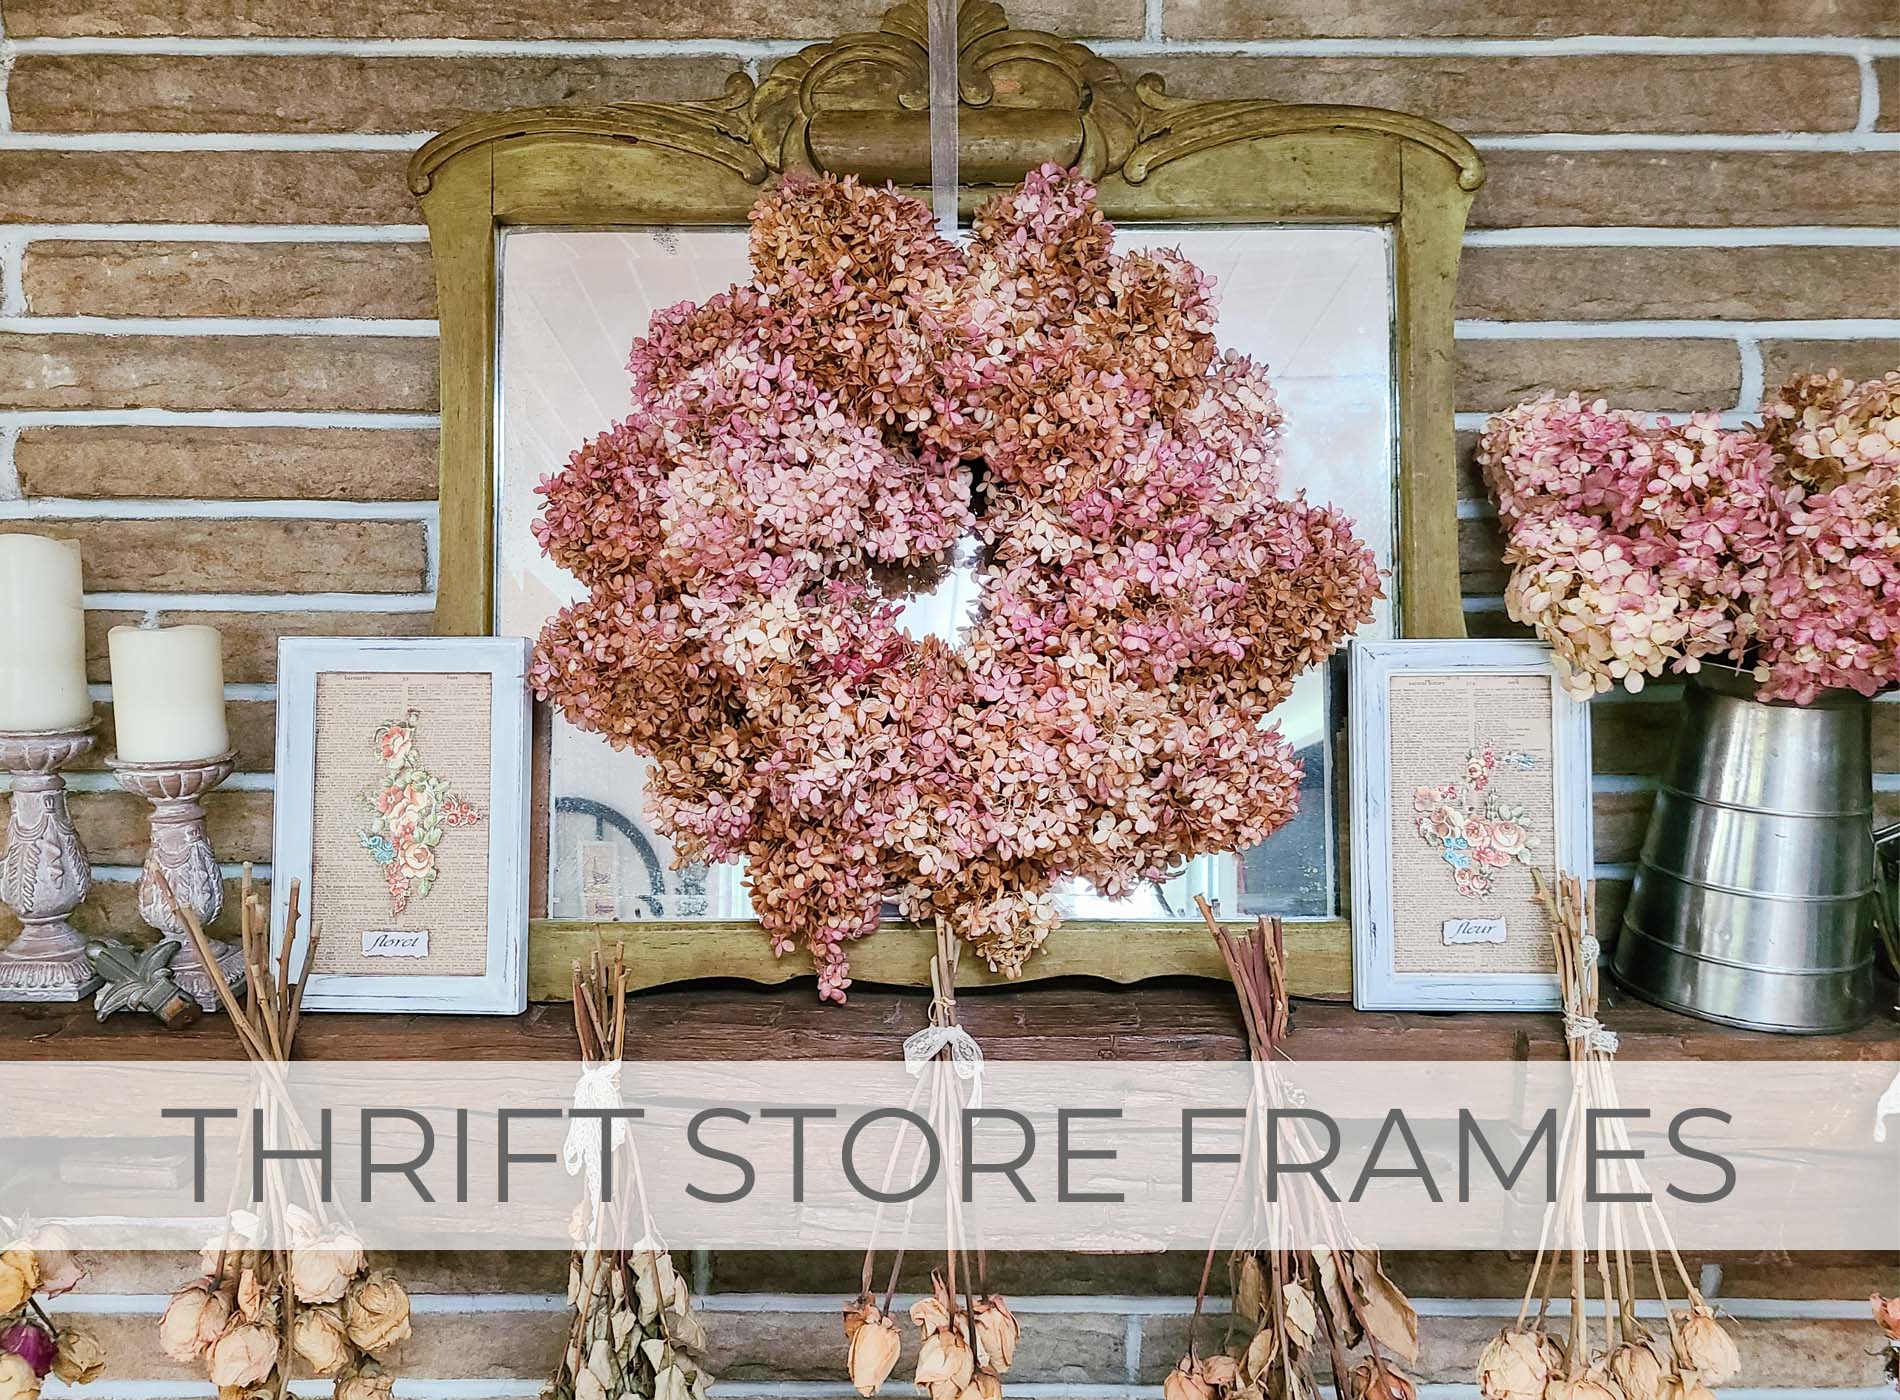 Thrift Store Frames Upcycled into Farmhouse Style Art by Larissa of Prodigal Pieces | prodigalpieces.com #prodigalpieces